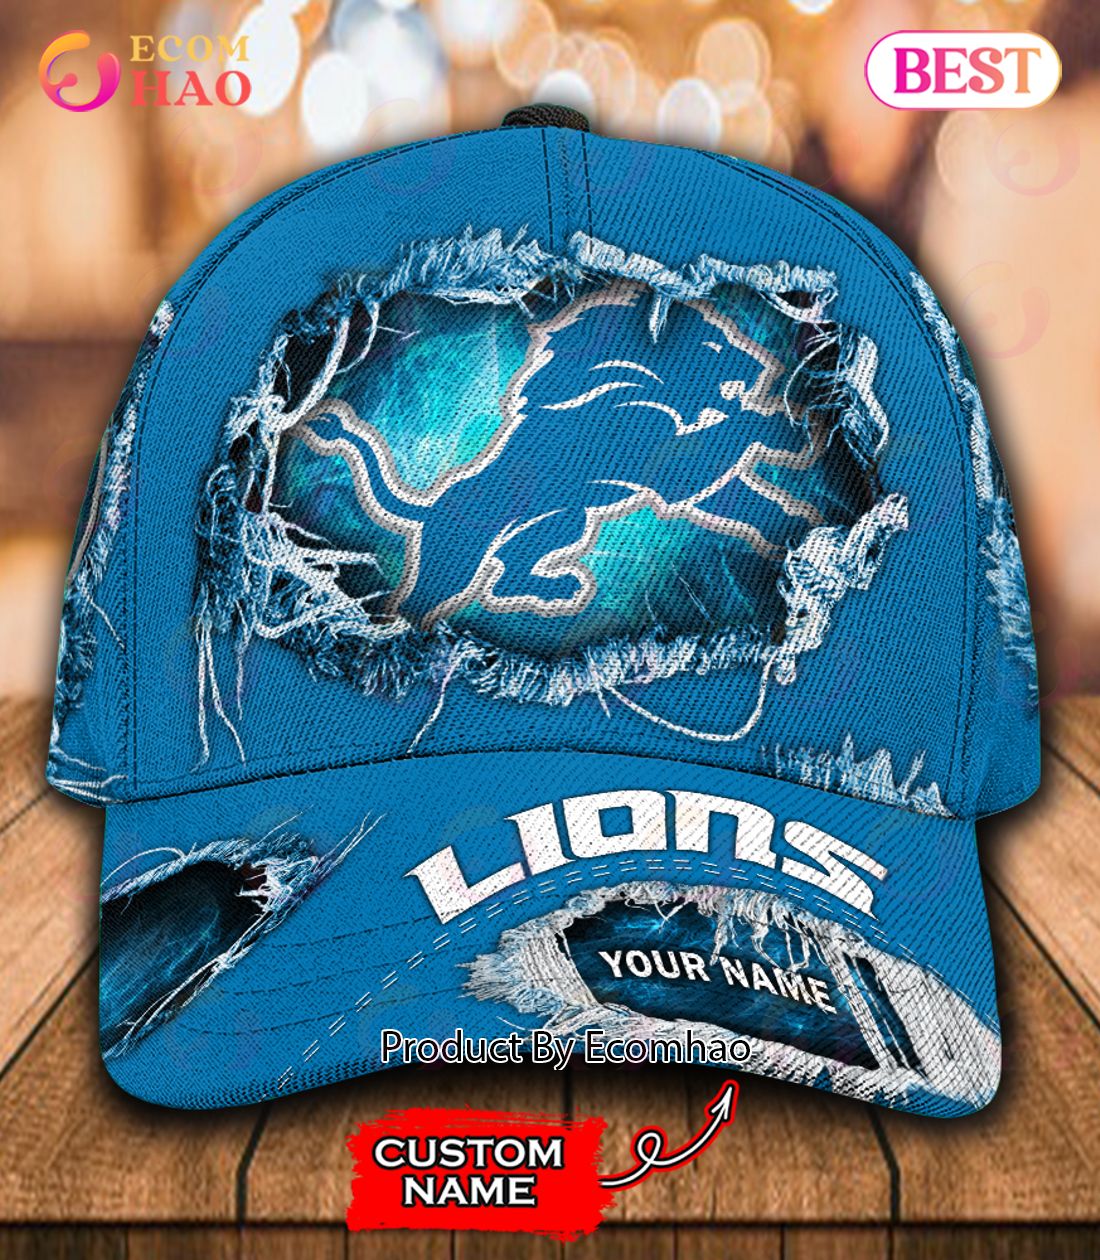 Auto Verdensrekord Guinness Book opladning NFL Detroit Lions Cap Custom Name - Ecomhao Store